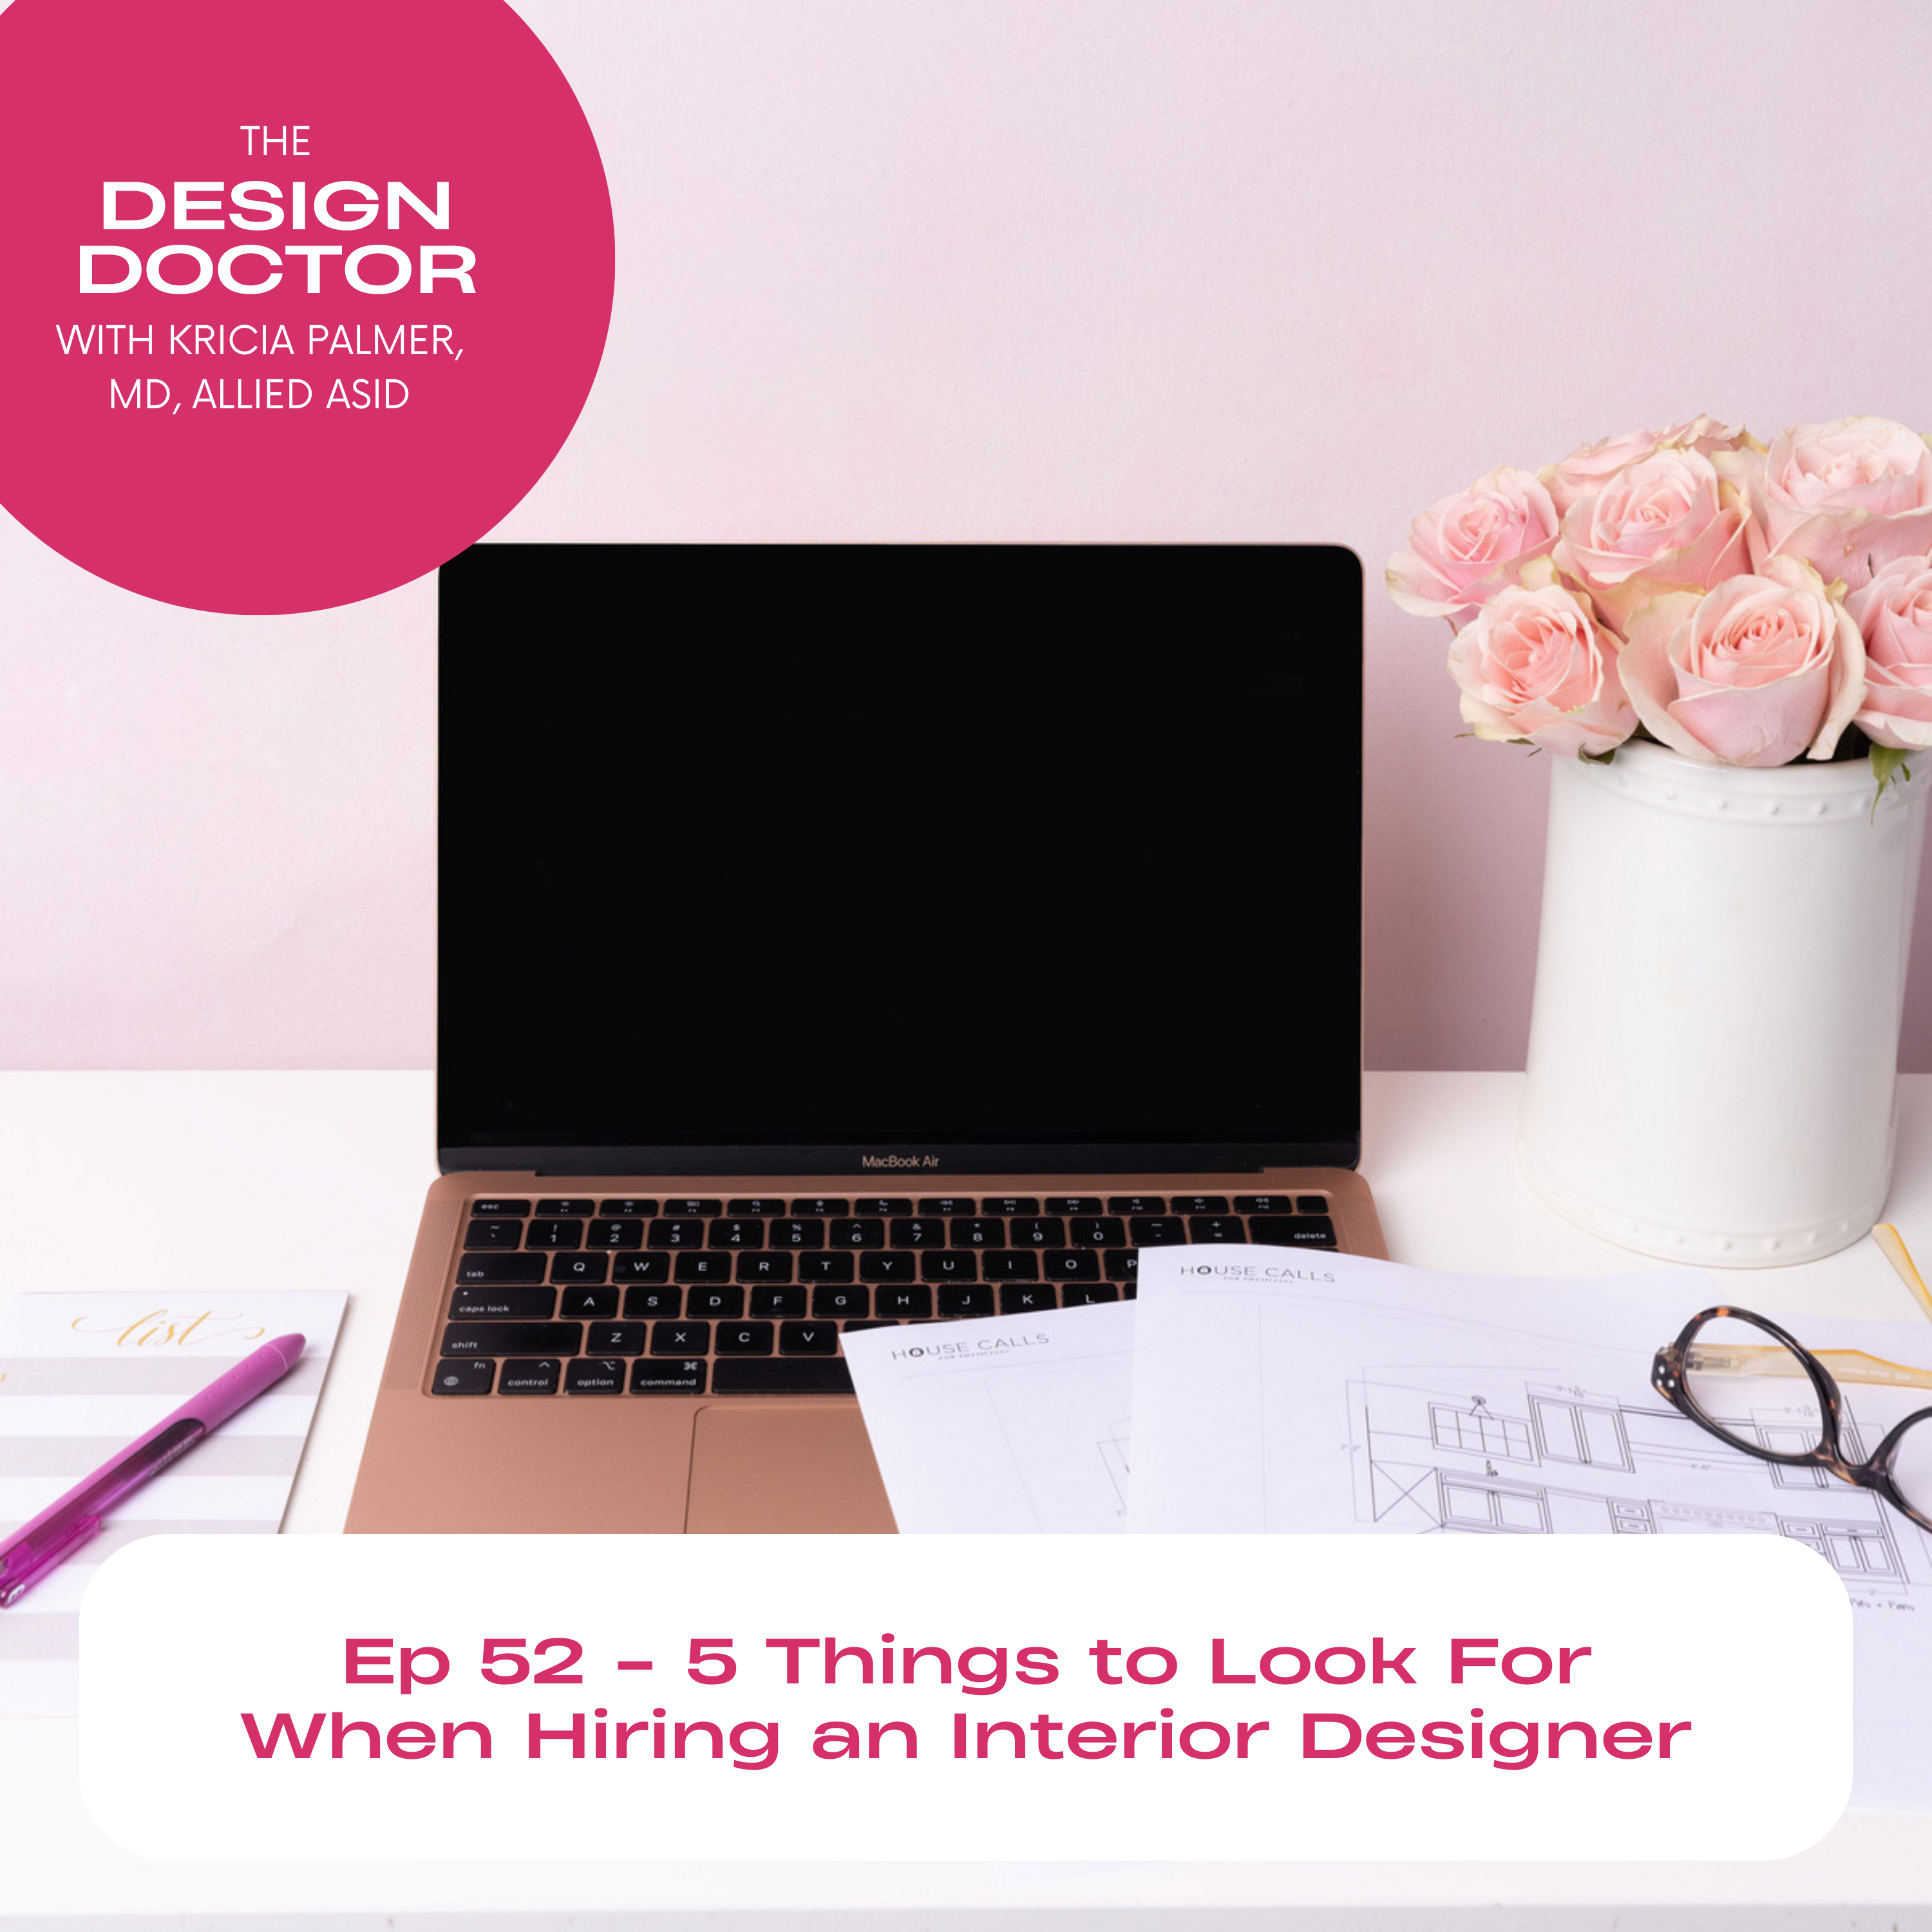 Episode 52 - 5 Things to Look For When Hiring an Interior Designer